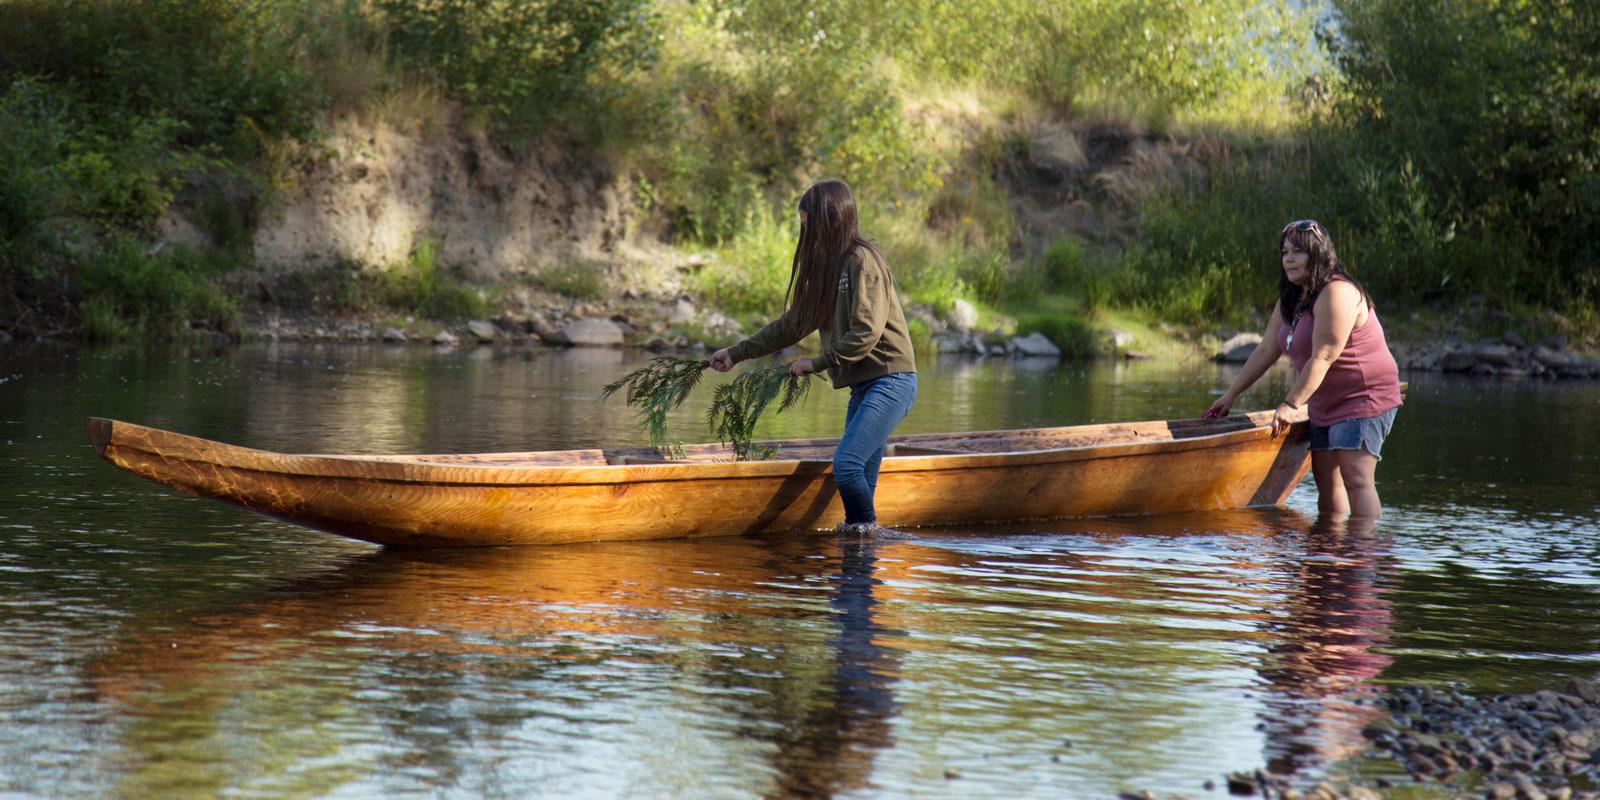 two women lay cedar branches in the canoe in the water